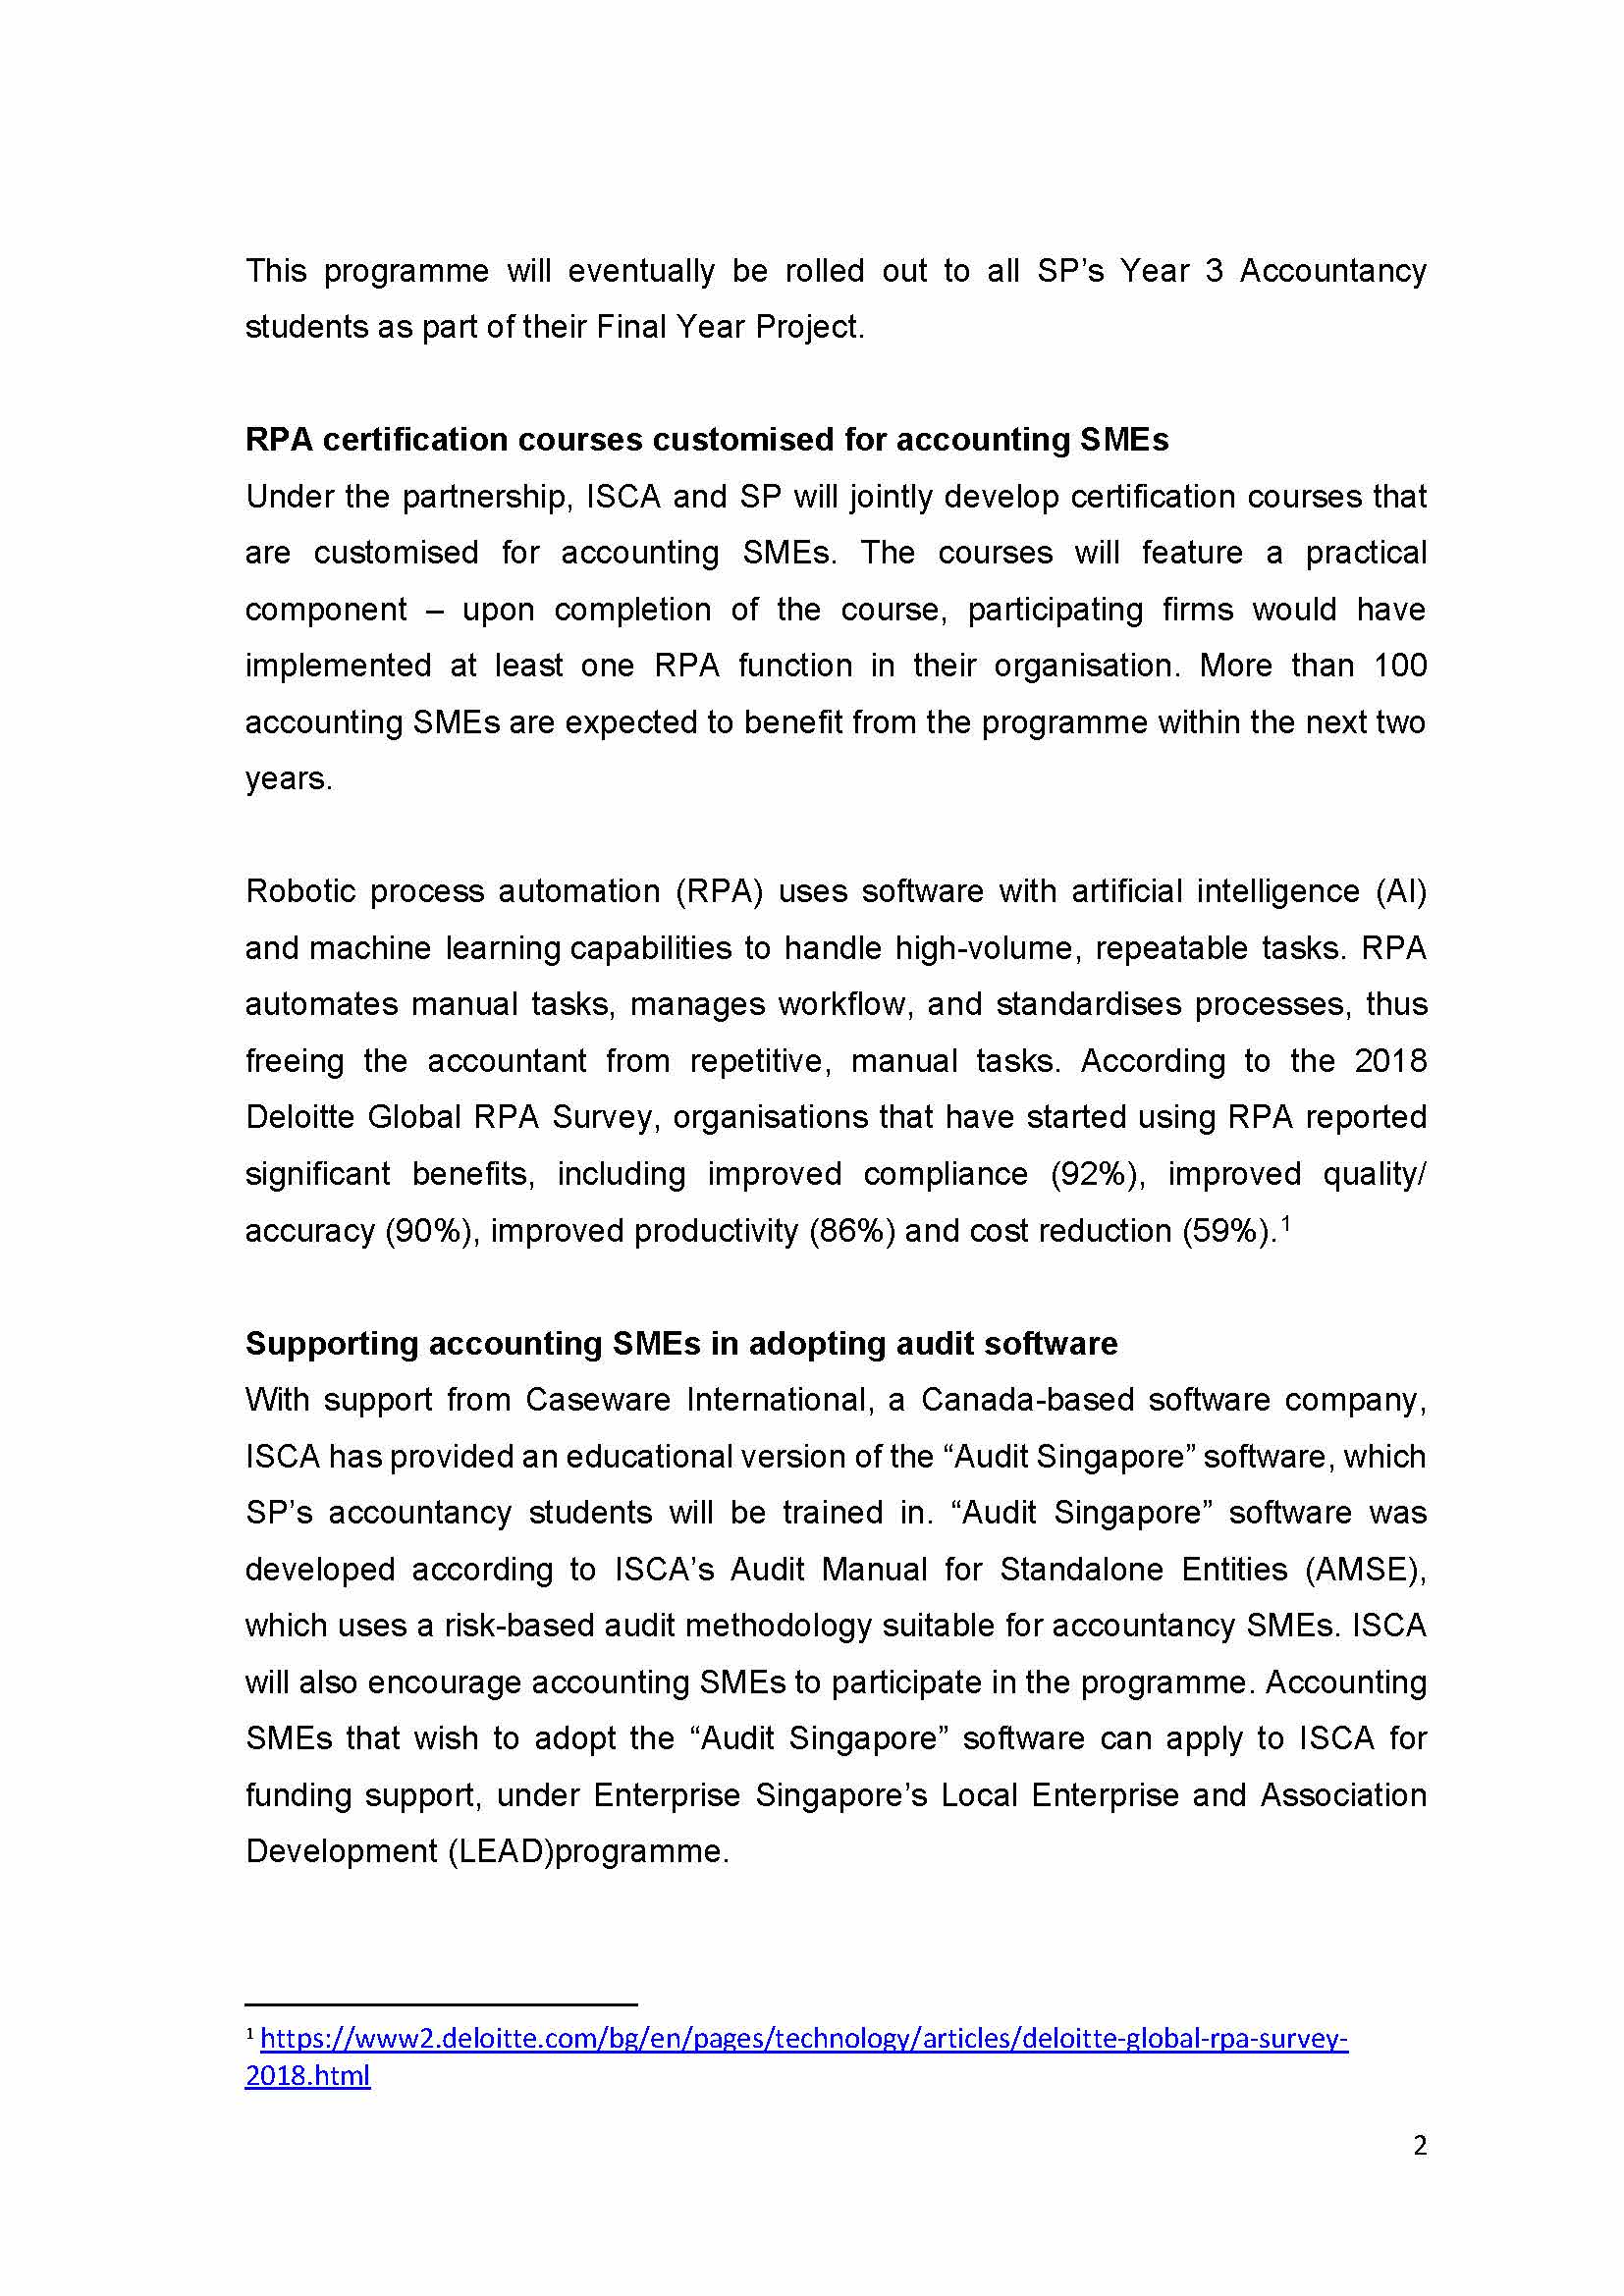 ISCA_SP MOU Press Release Final for issuance_SP_Page_2